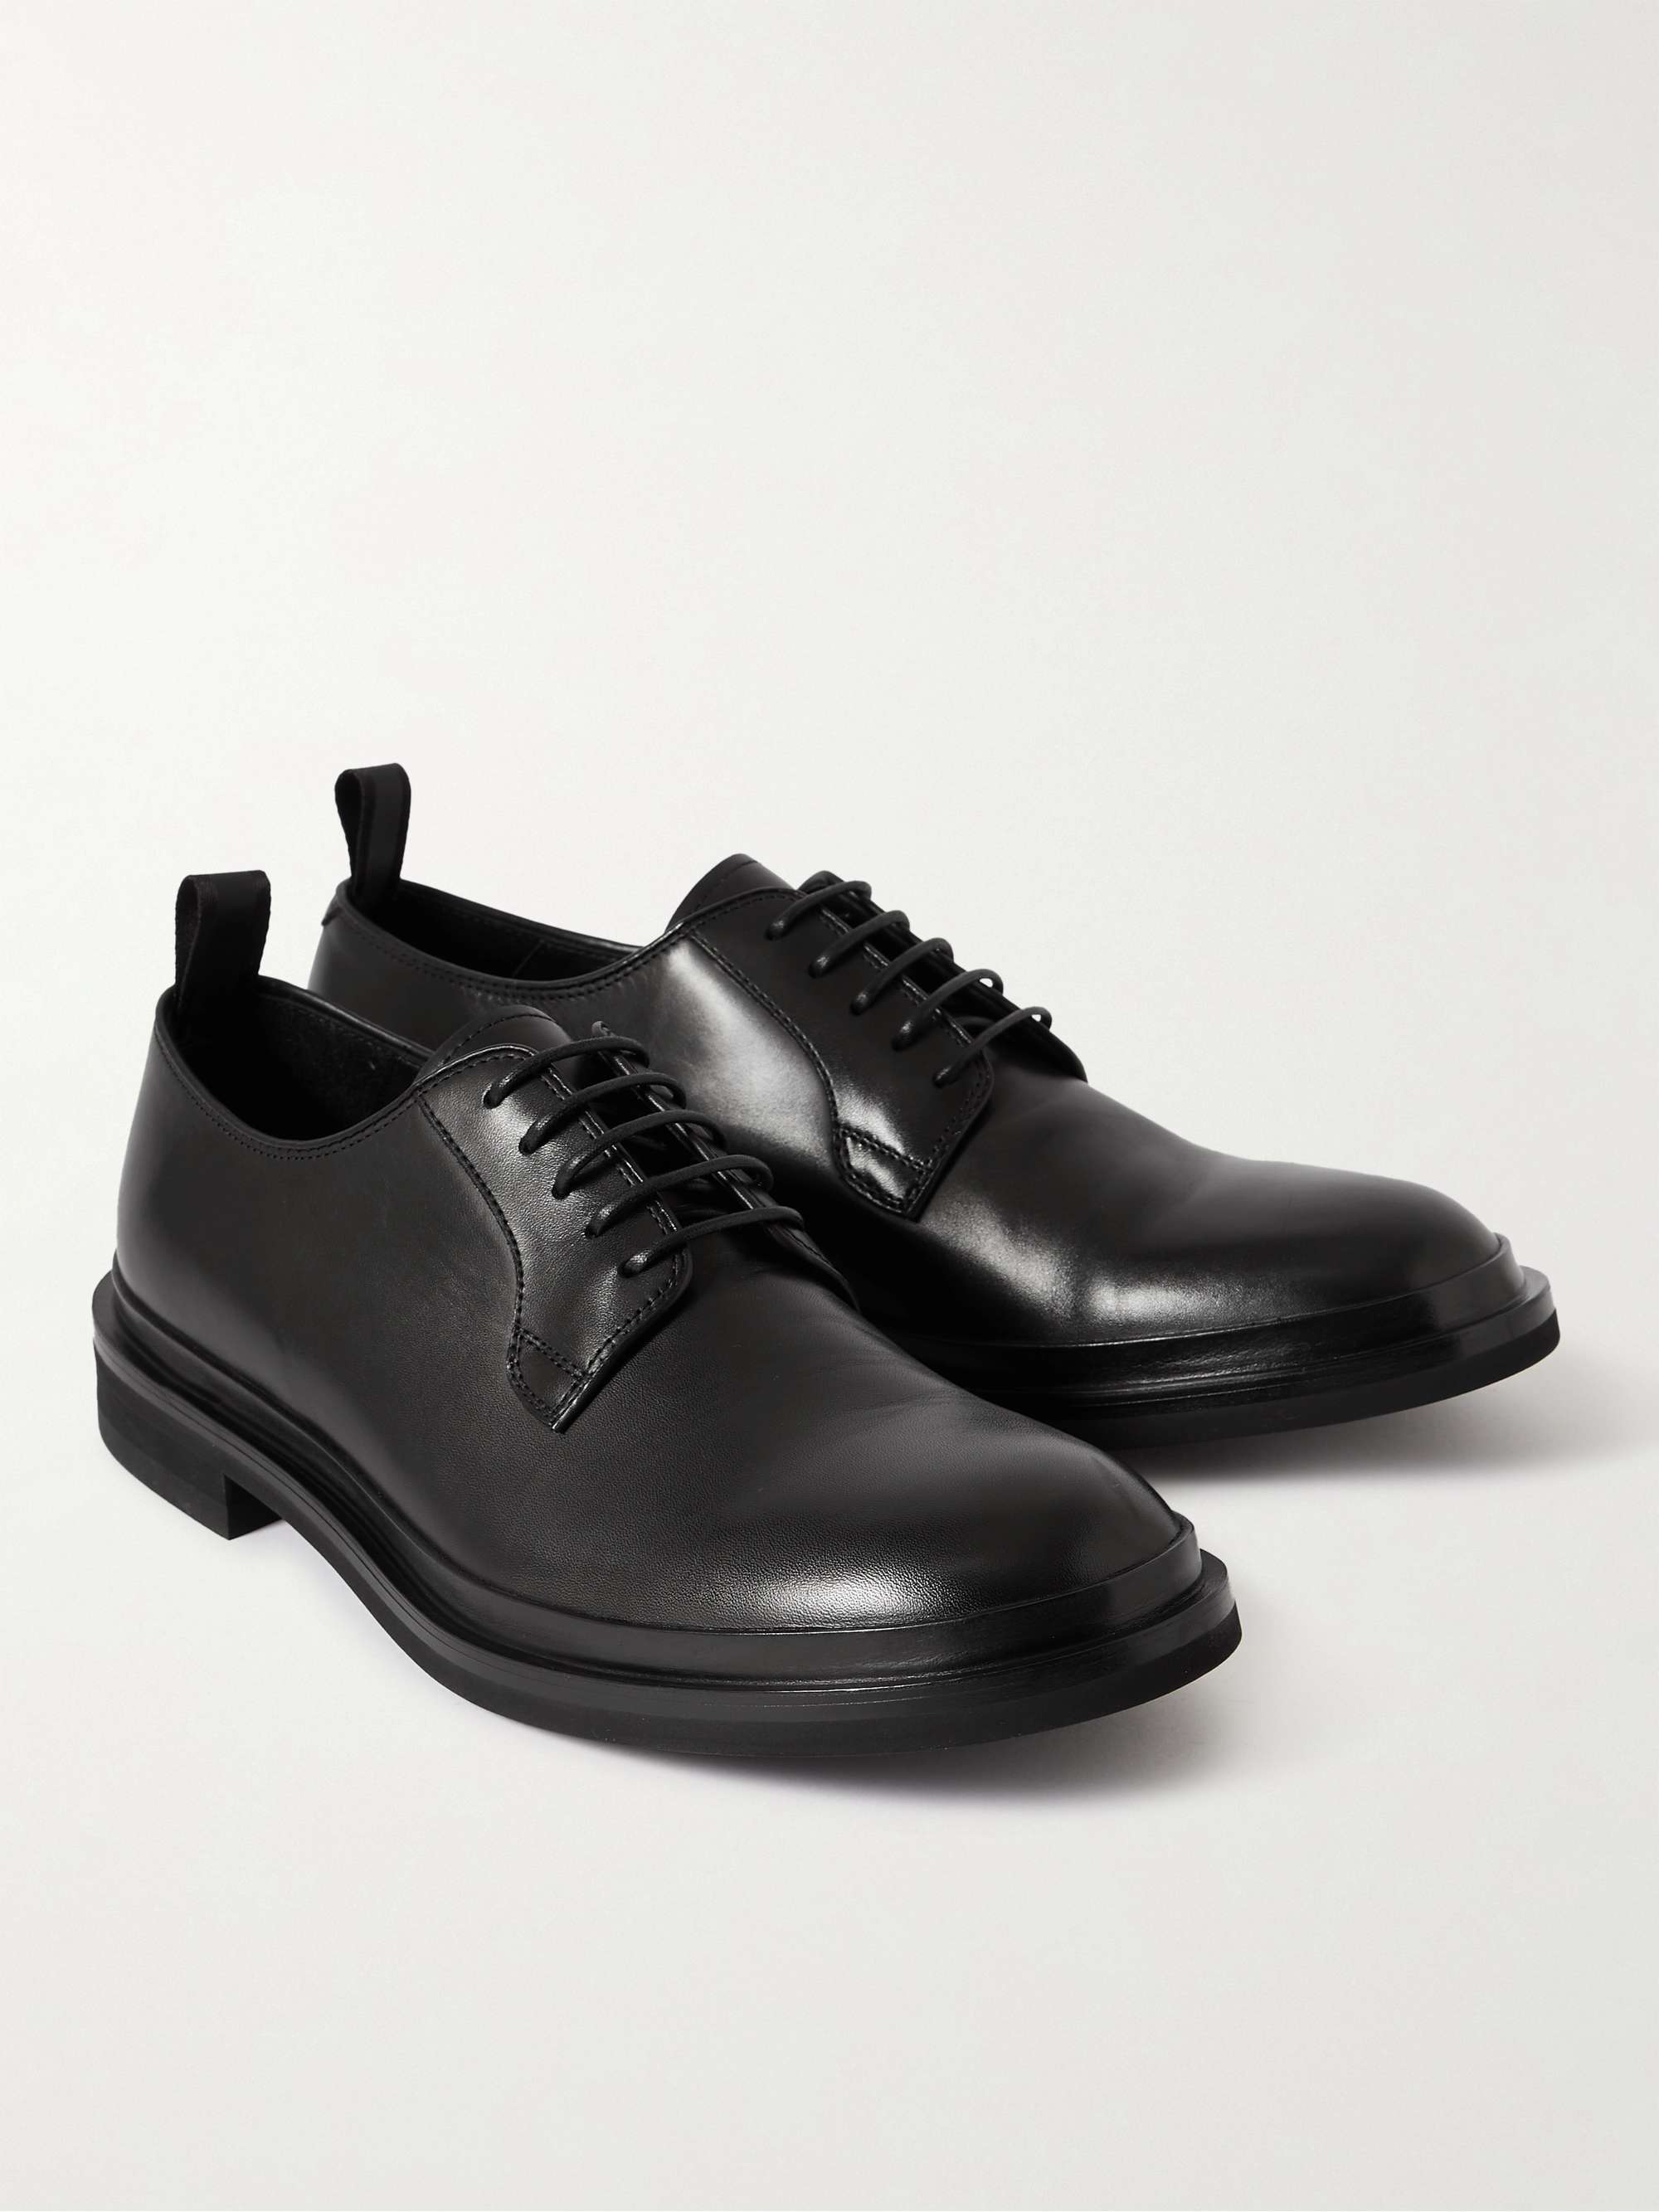 OFFICINE CREATIVE Major Leather Derby Shoes